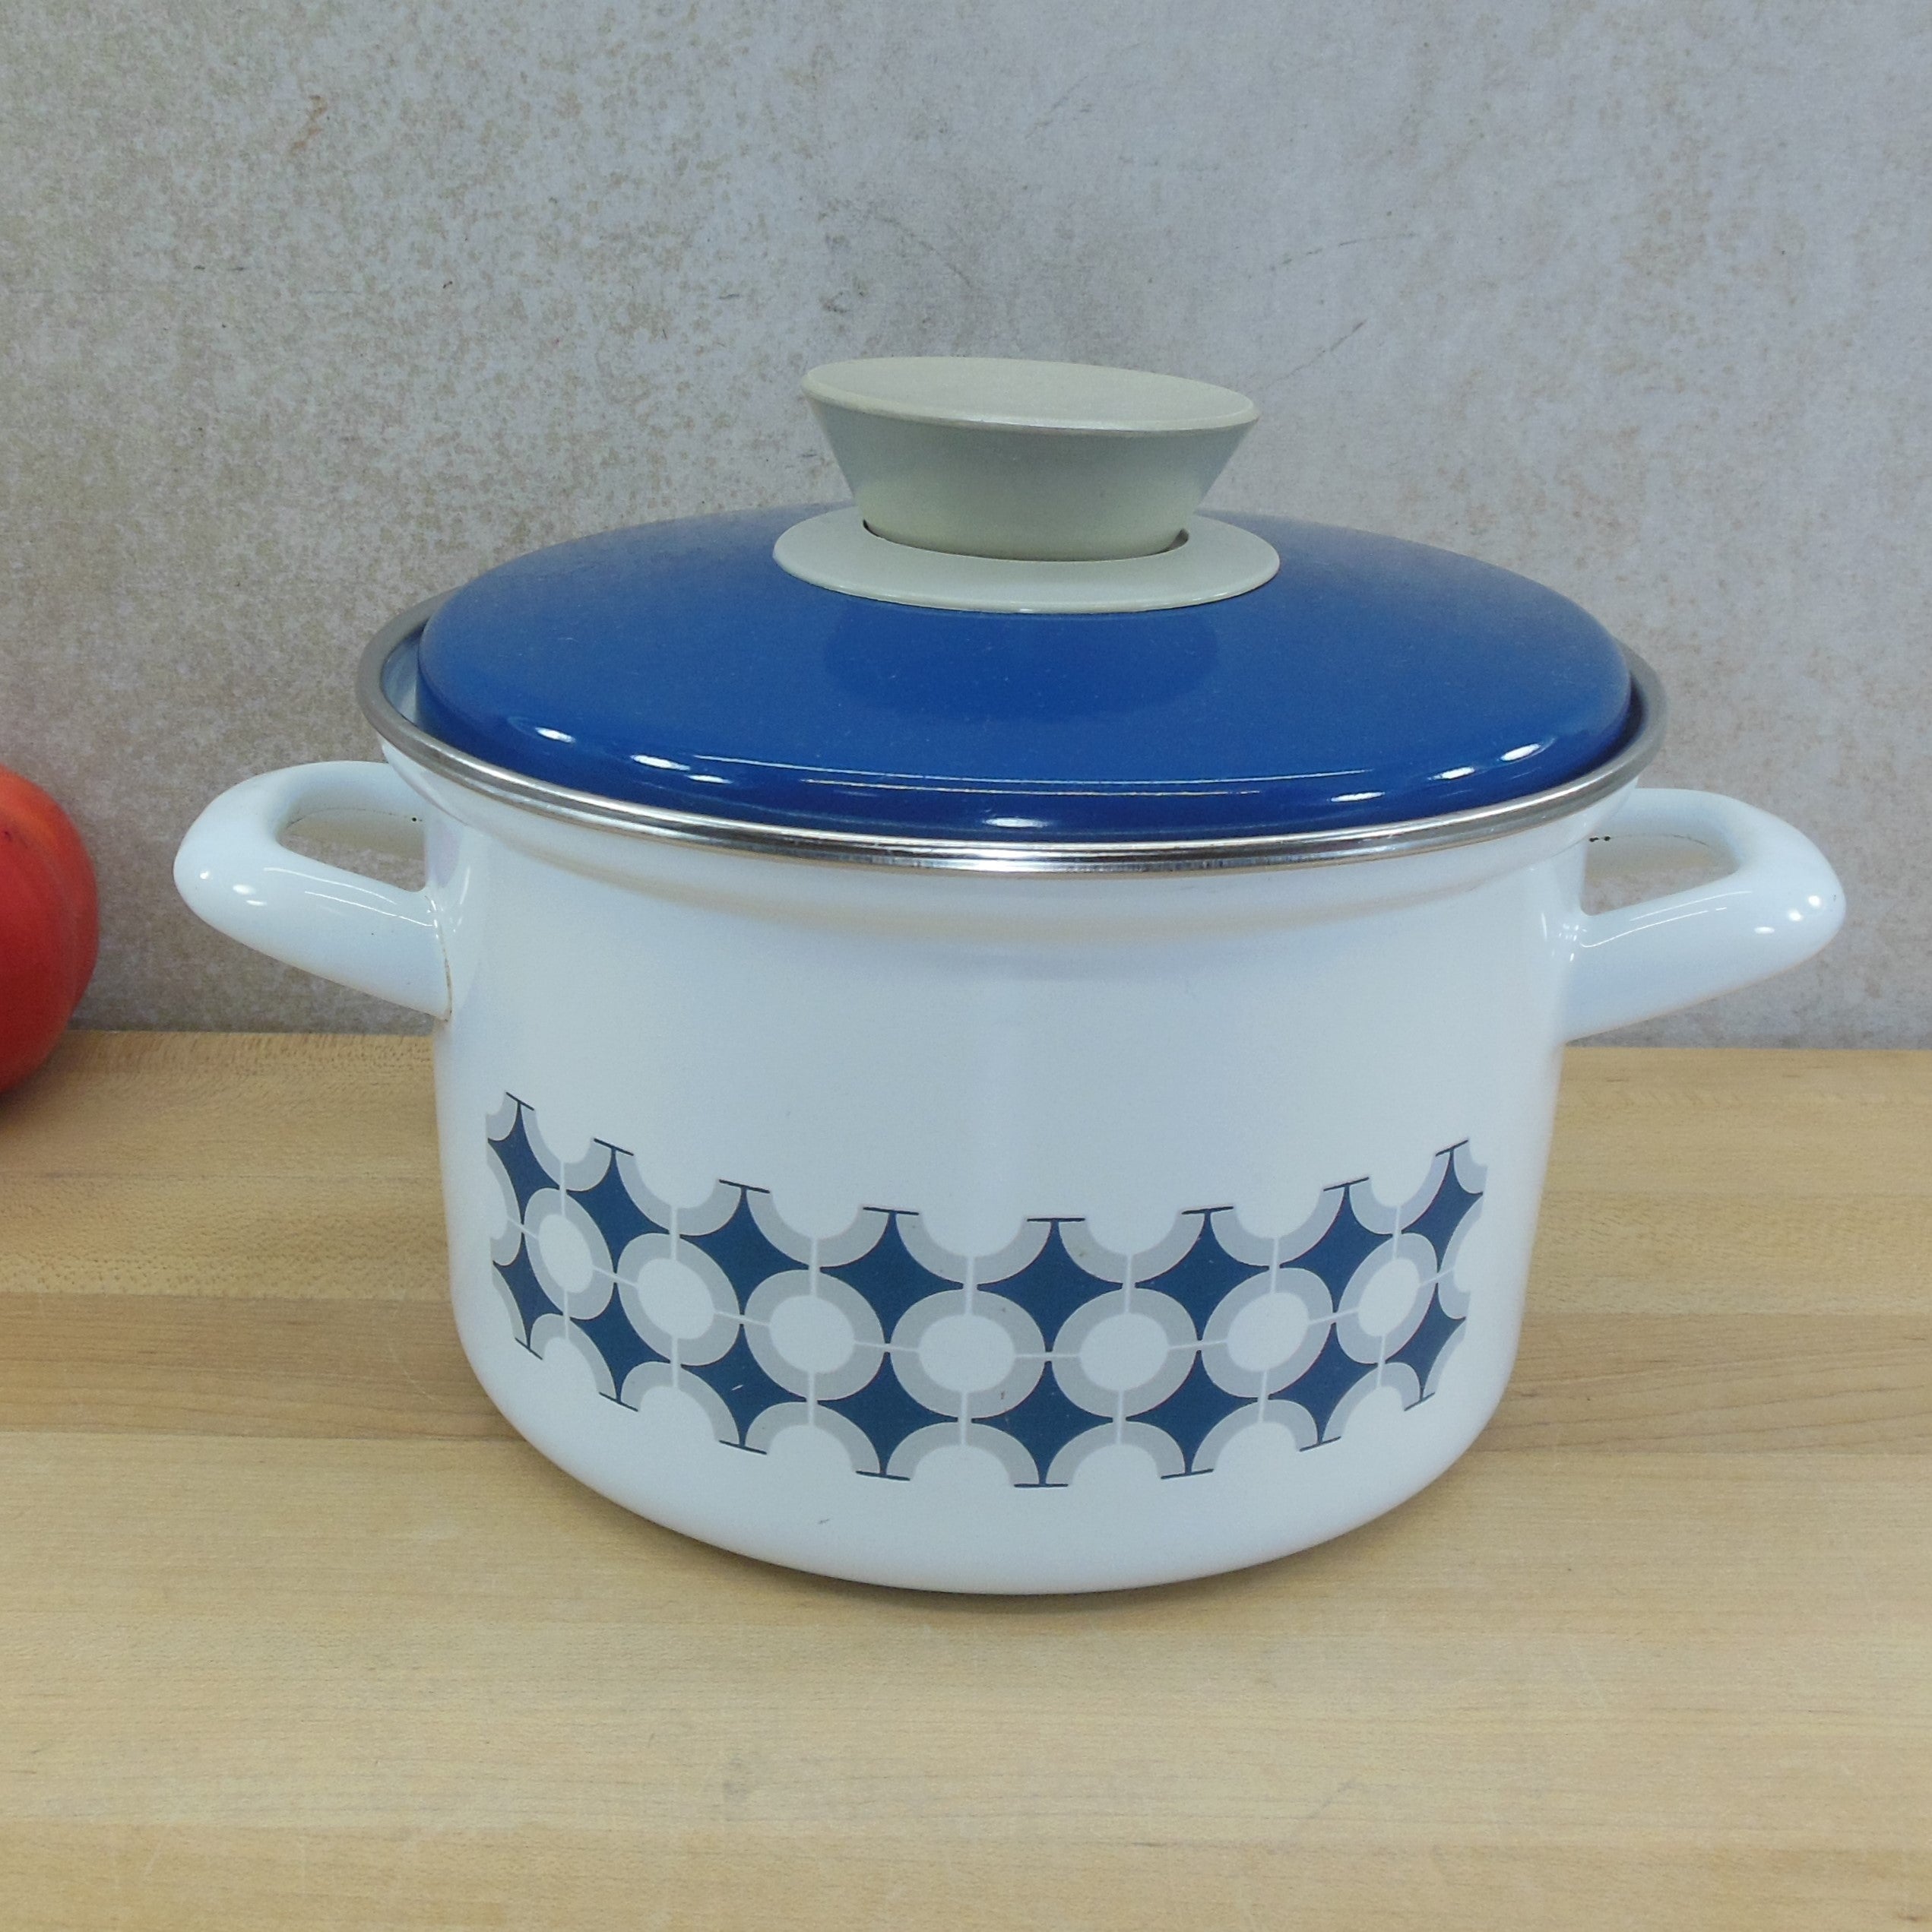 Shake White and Turquoise Enamelware Pot with a Glass Lid